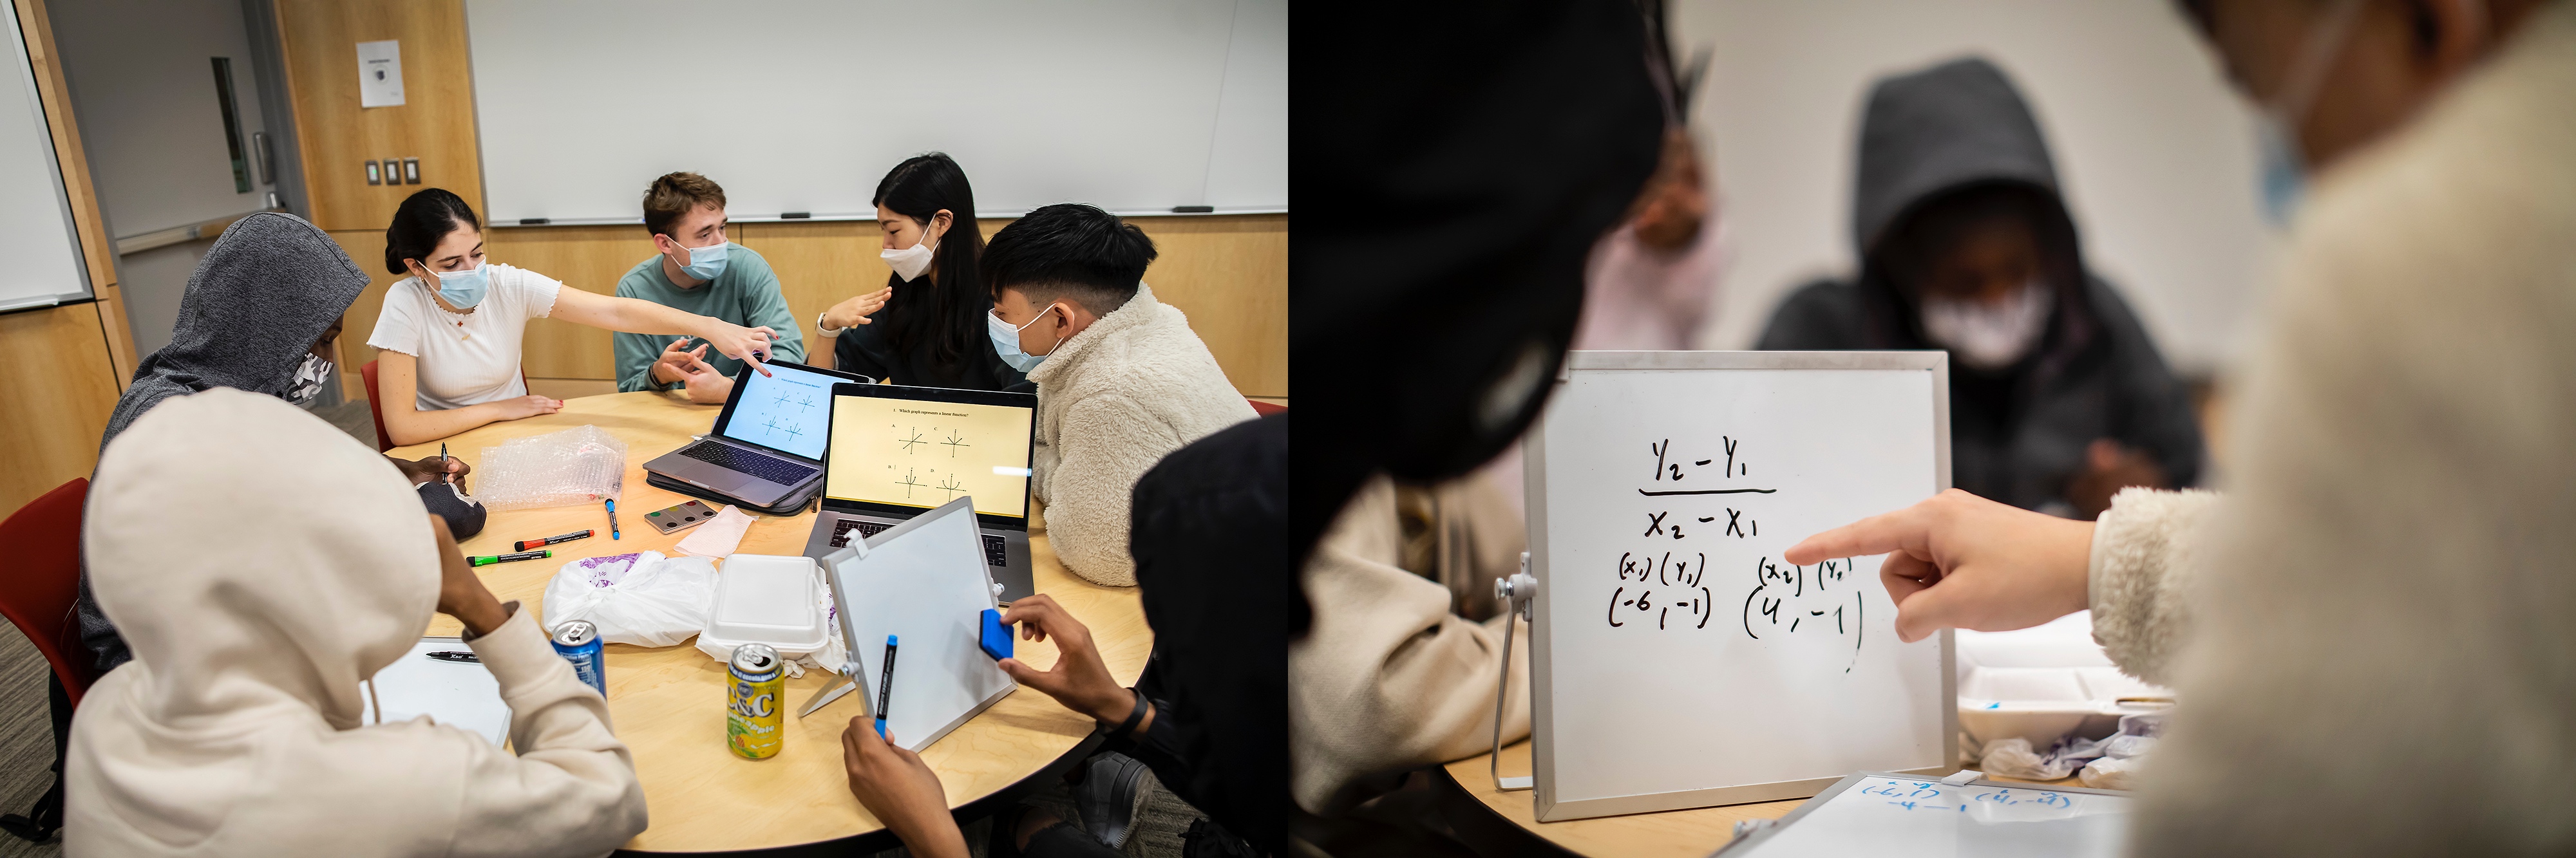 on the right, students work in groups on math problems looking at laptops and on the left a student points at math equations on a white board